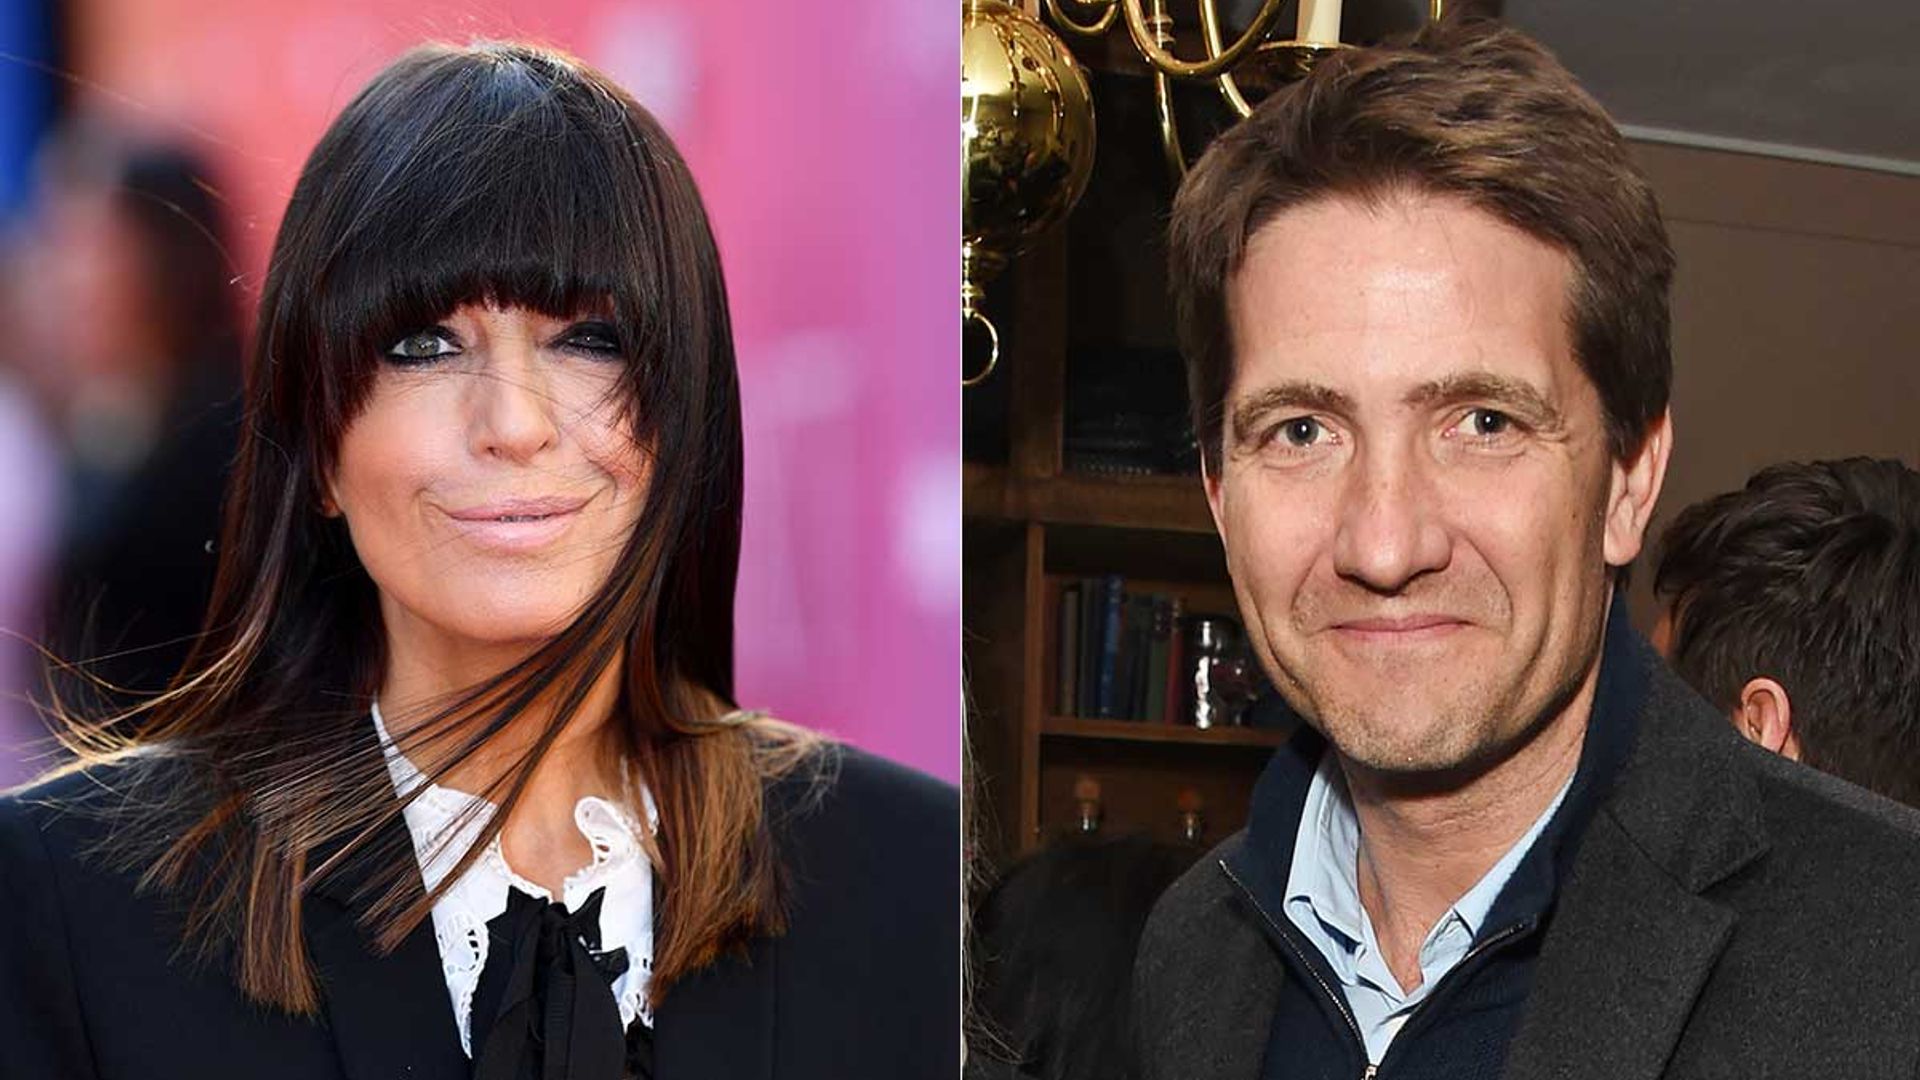 Claudia Winkleman's family - meet the Strictly host's famous husband and royal sister